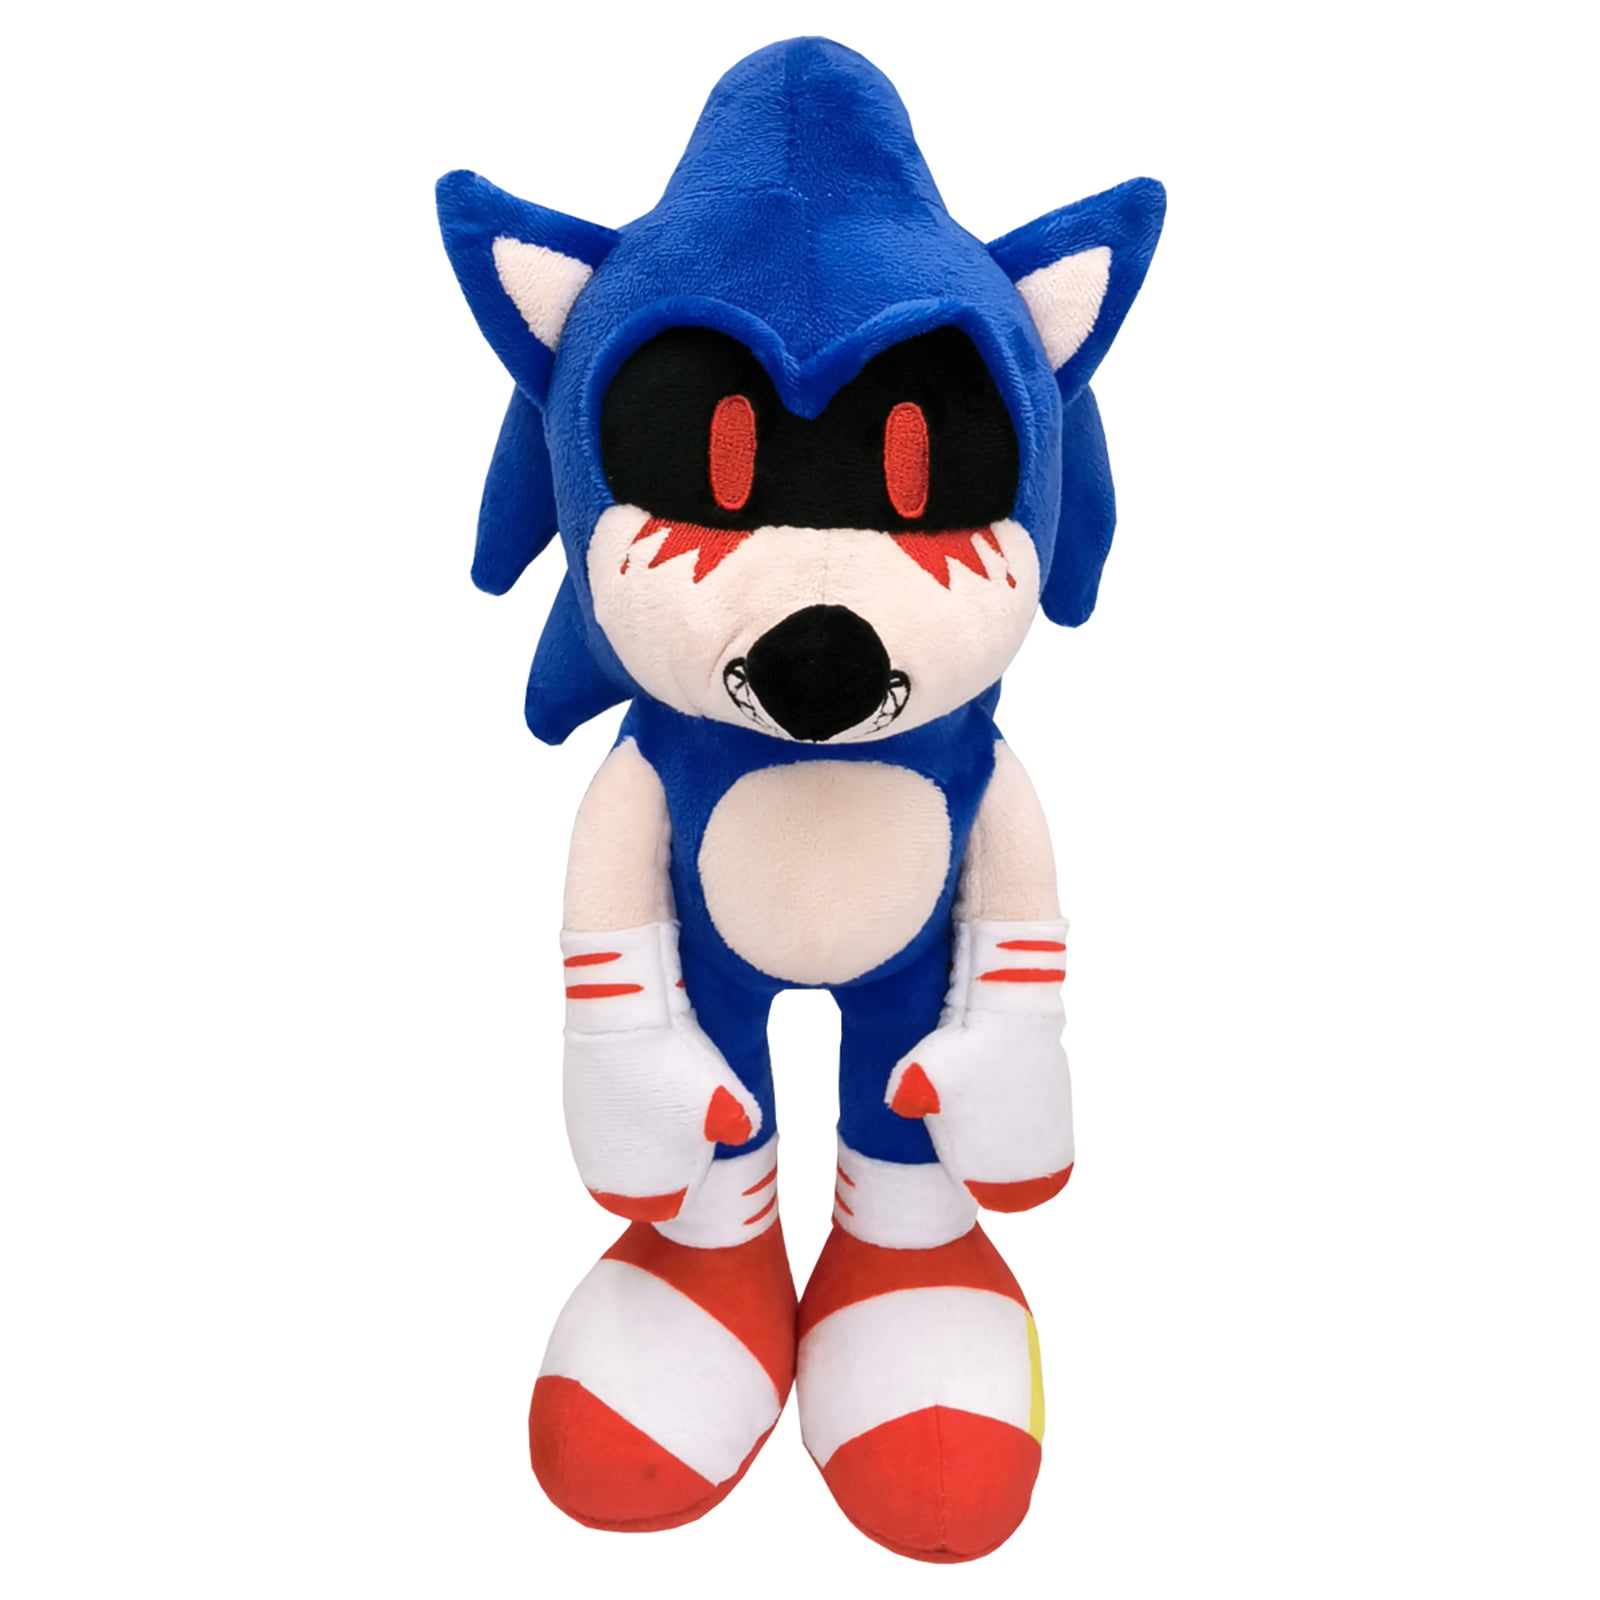 NEW OFFICIAL SEGA SONIC THE HEDGEHOG SOFT PLUSH TOYS KNUCKLES SHADOW TAILS SONIC 